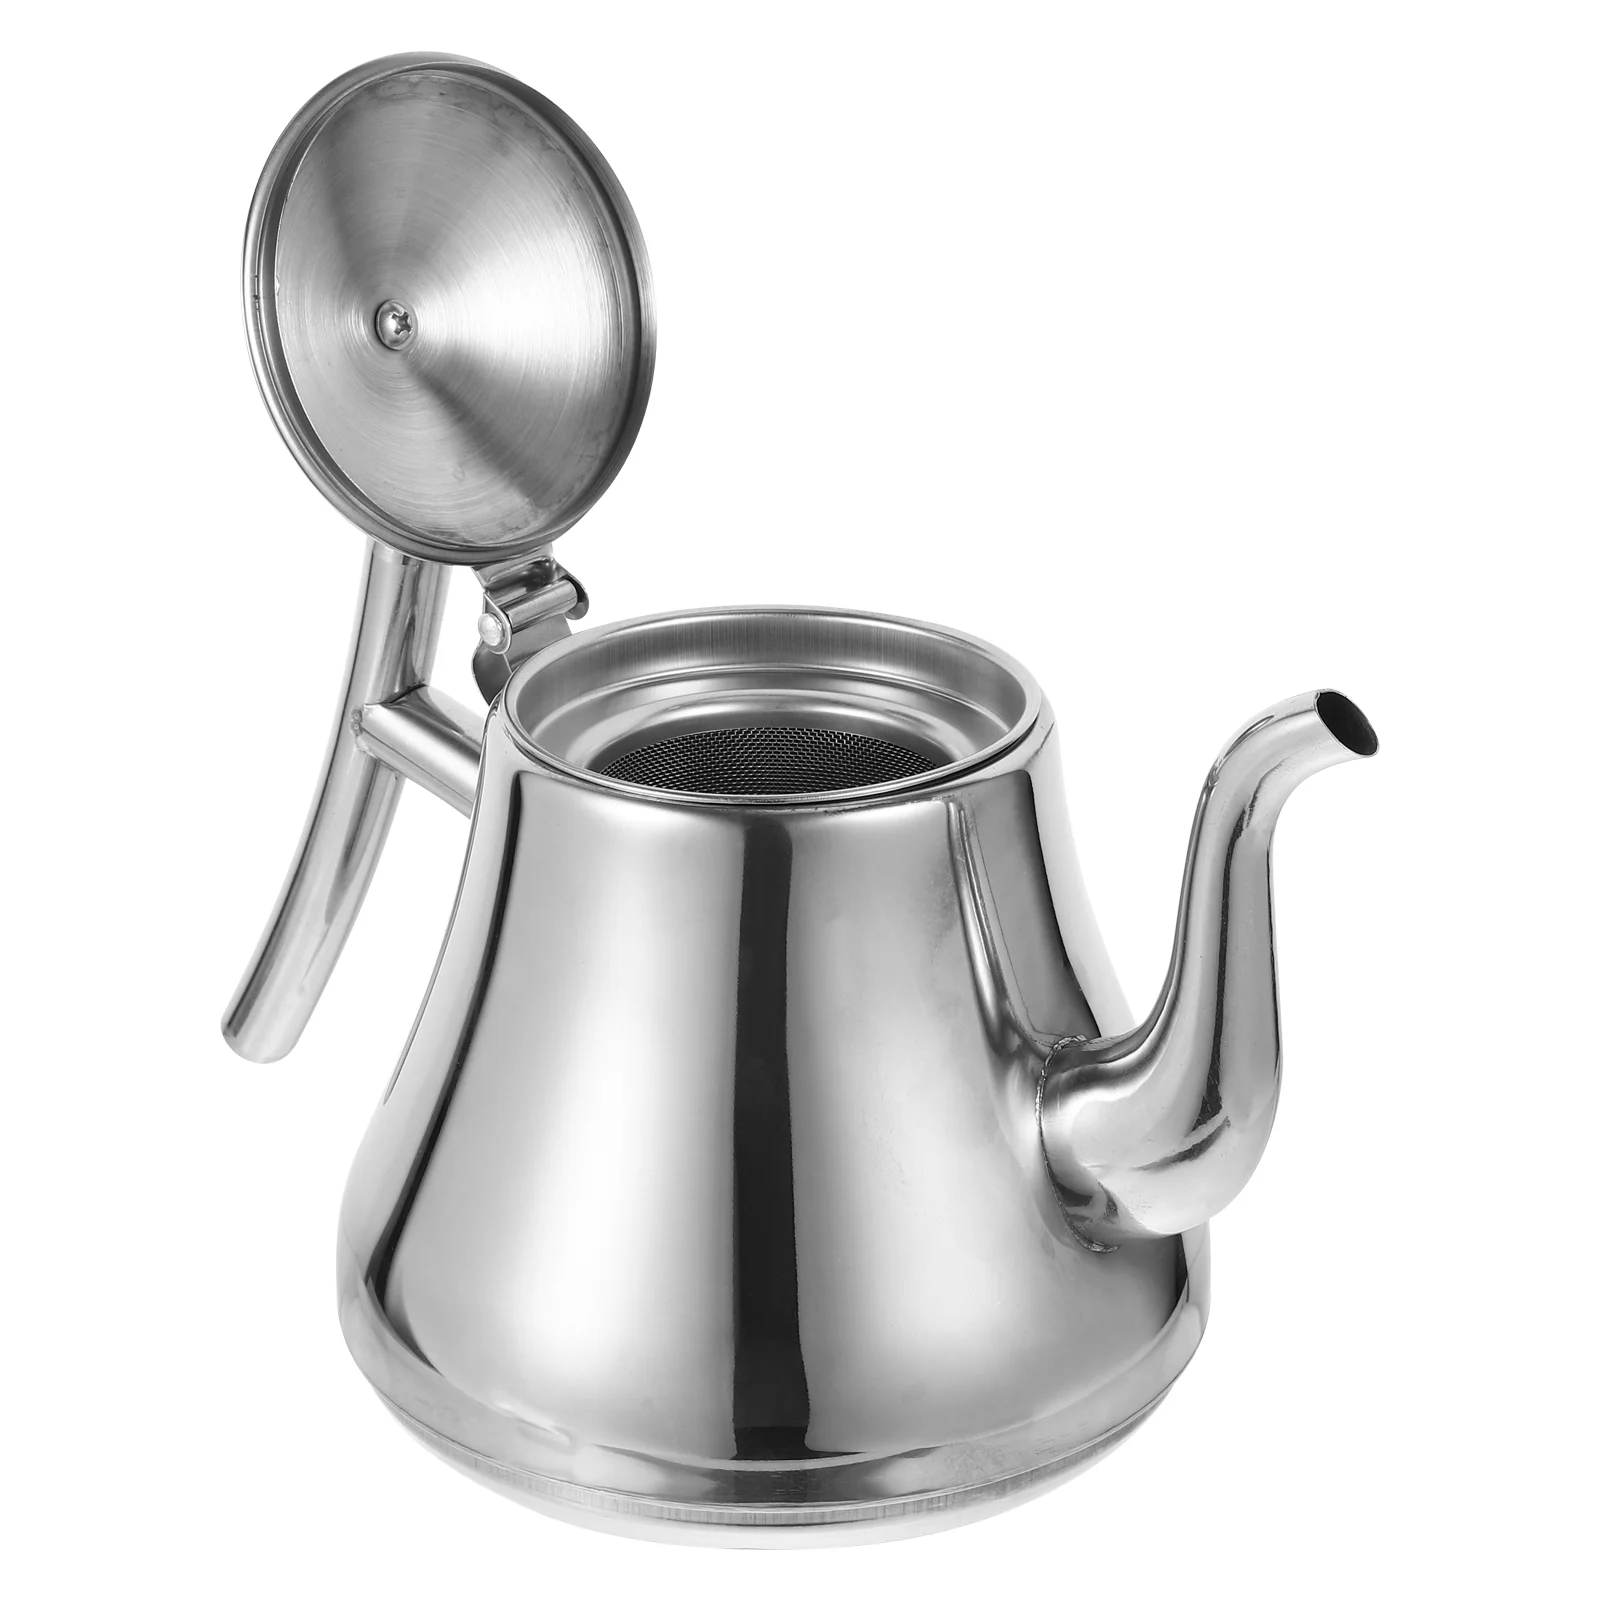 

Kettle Tea Teapot Coffee Stovetop Pot Water Steel Stainless Gooseneck Top Pour Stove Maker For Over Whistling Boiling Spout With